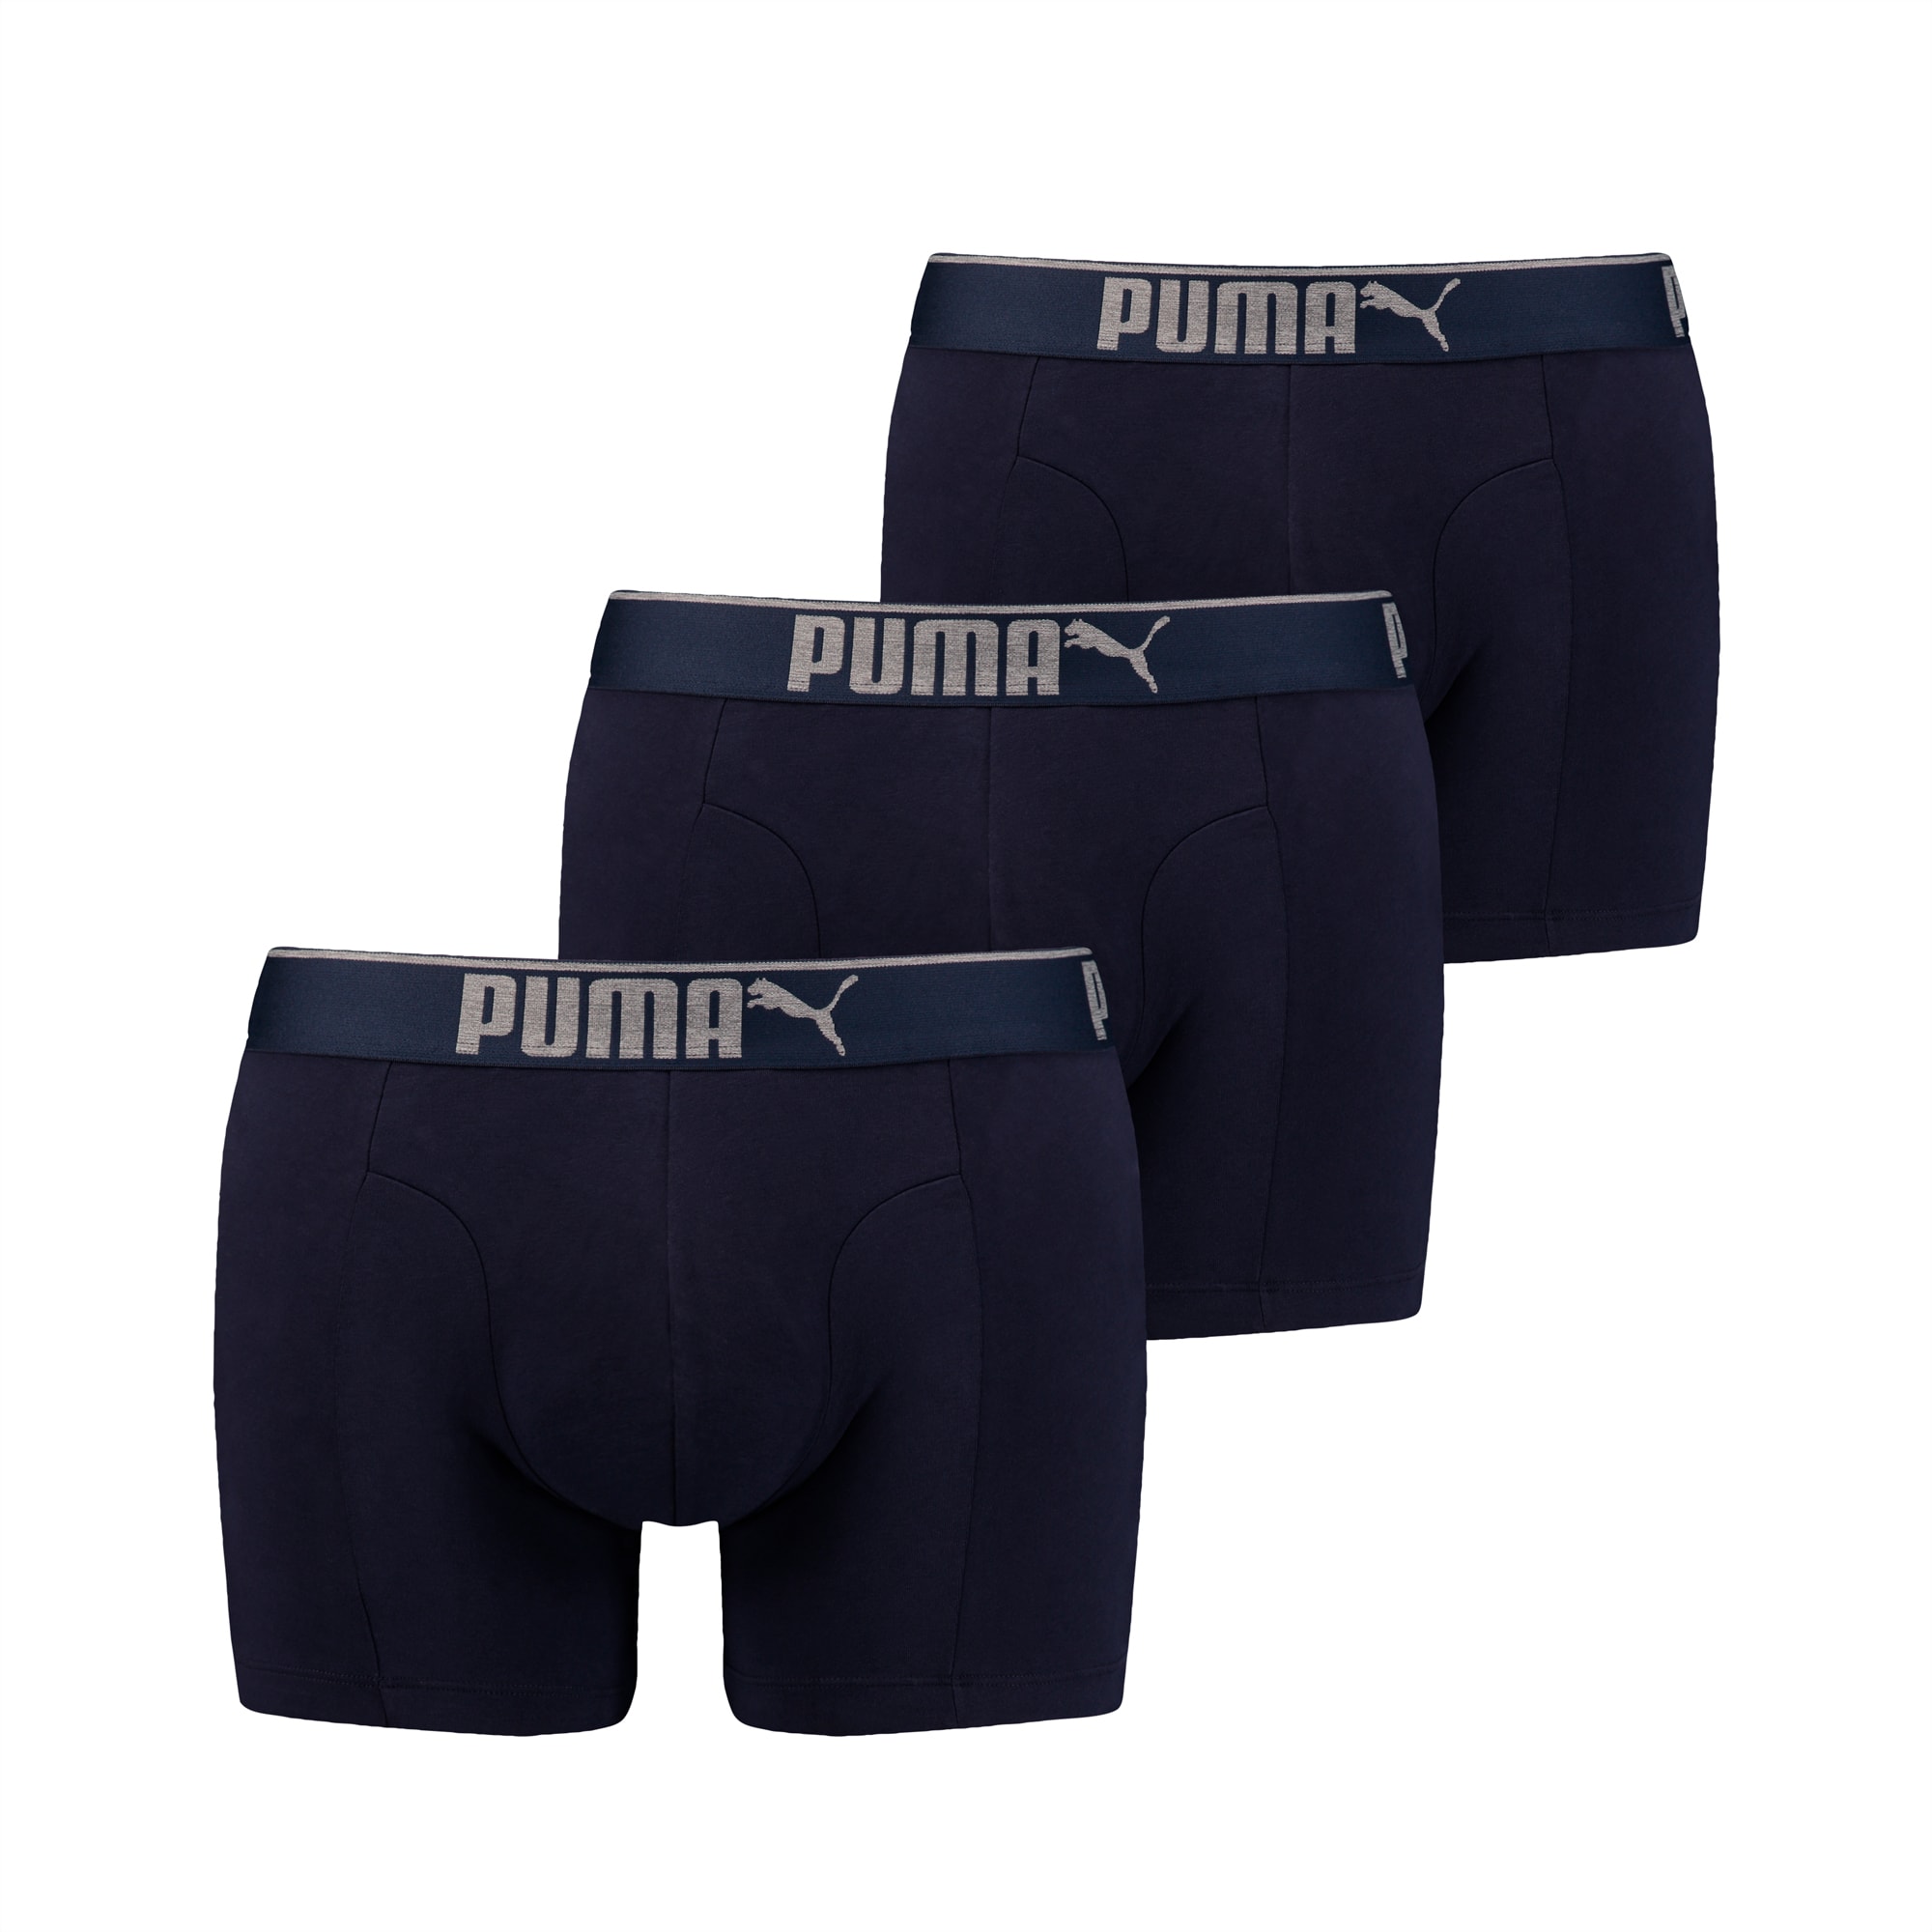 Lifestyle Sueded Cotton Boxer Shorts 